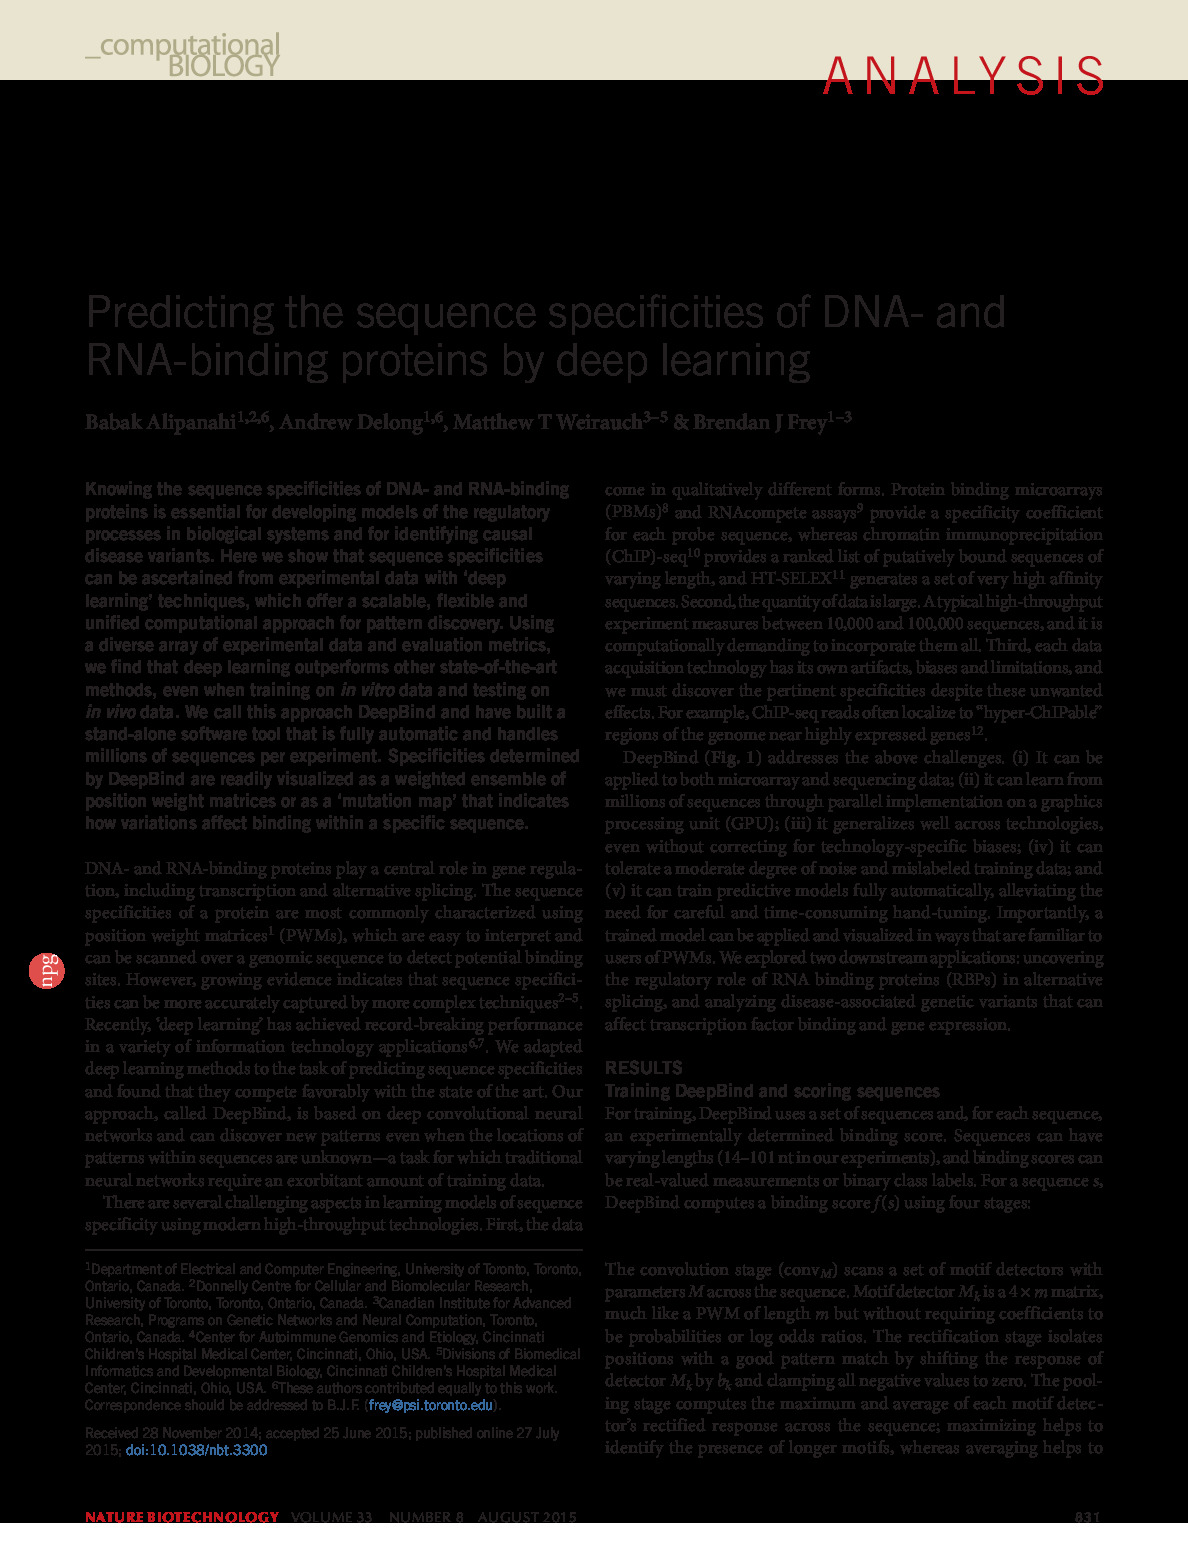 Predicting the sequence specificities of DNA and RNA binding proteins by deep learning